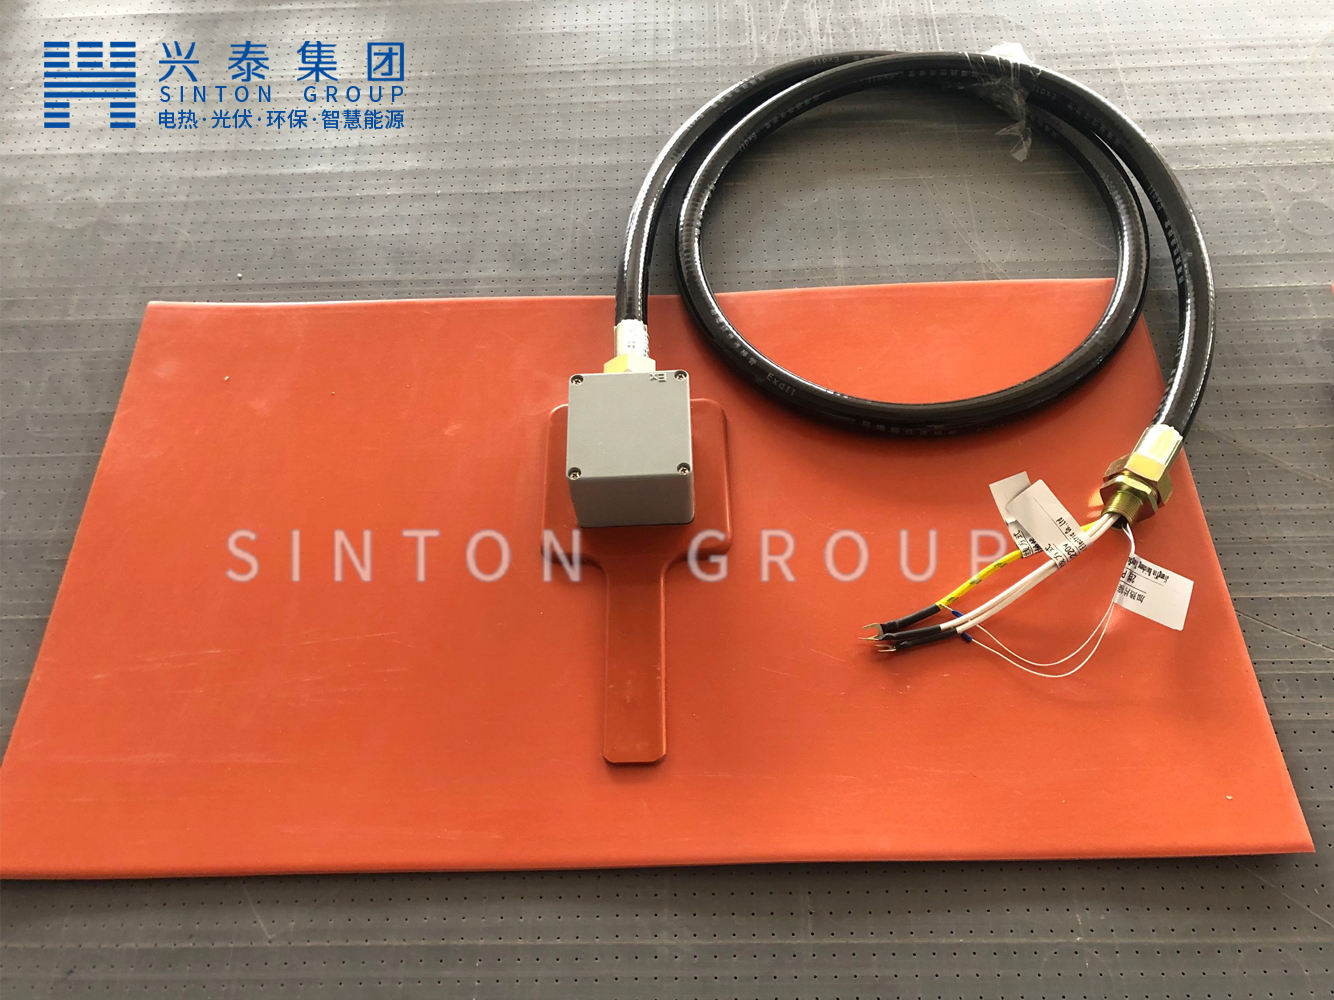 explosion-proof silicone heater.jpg